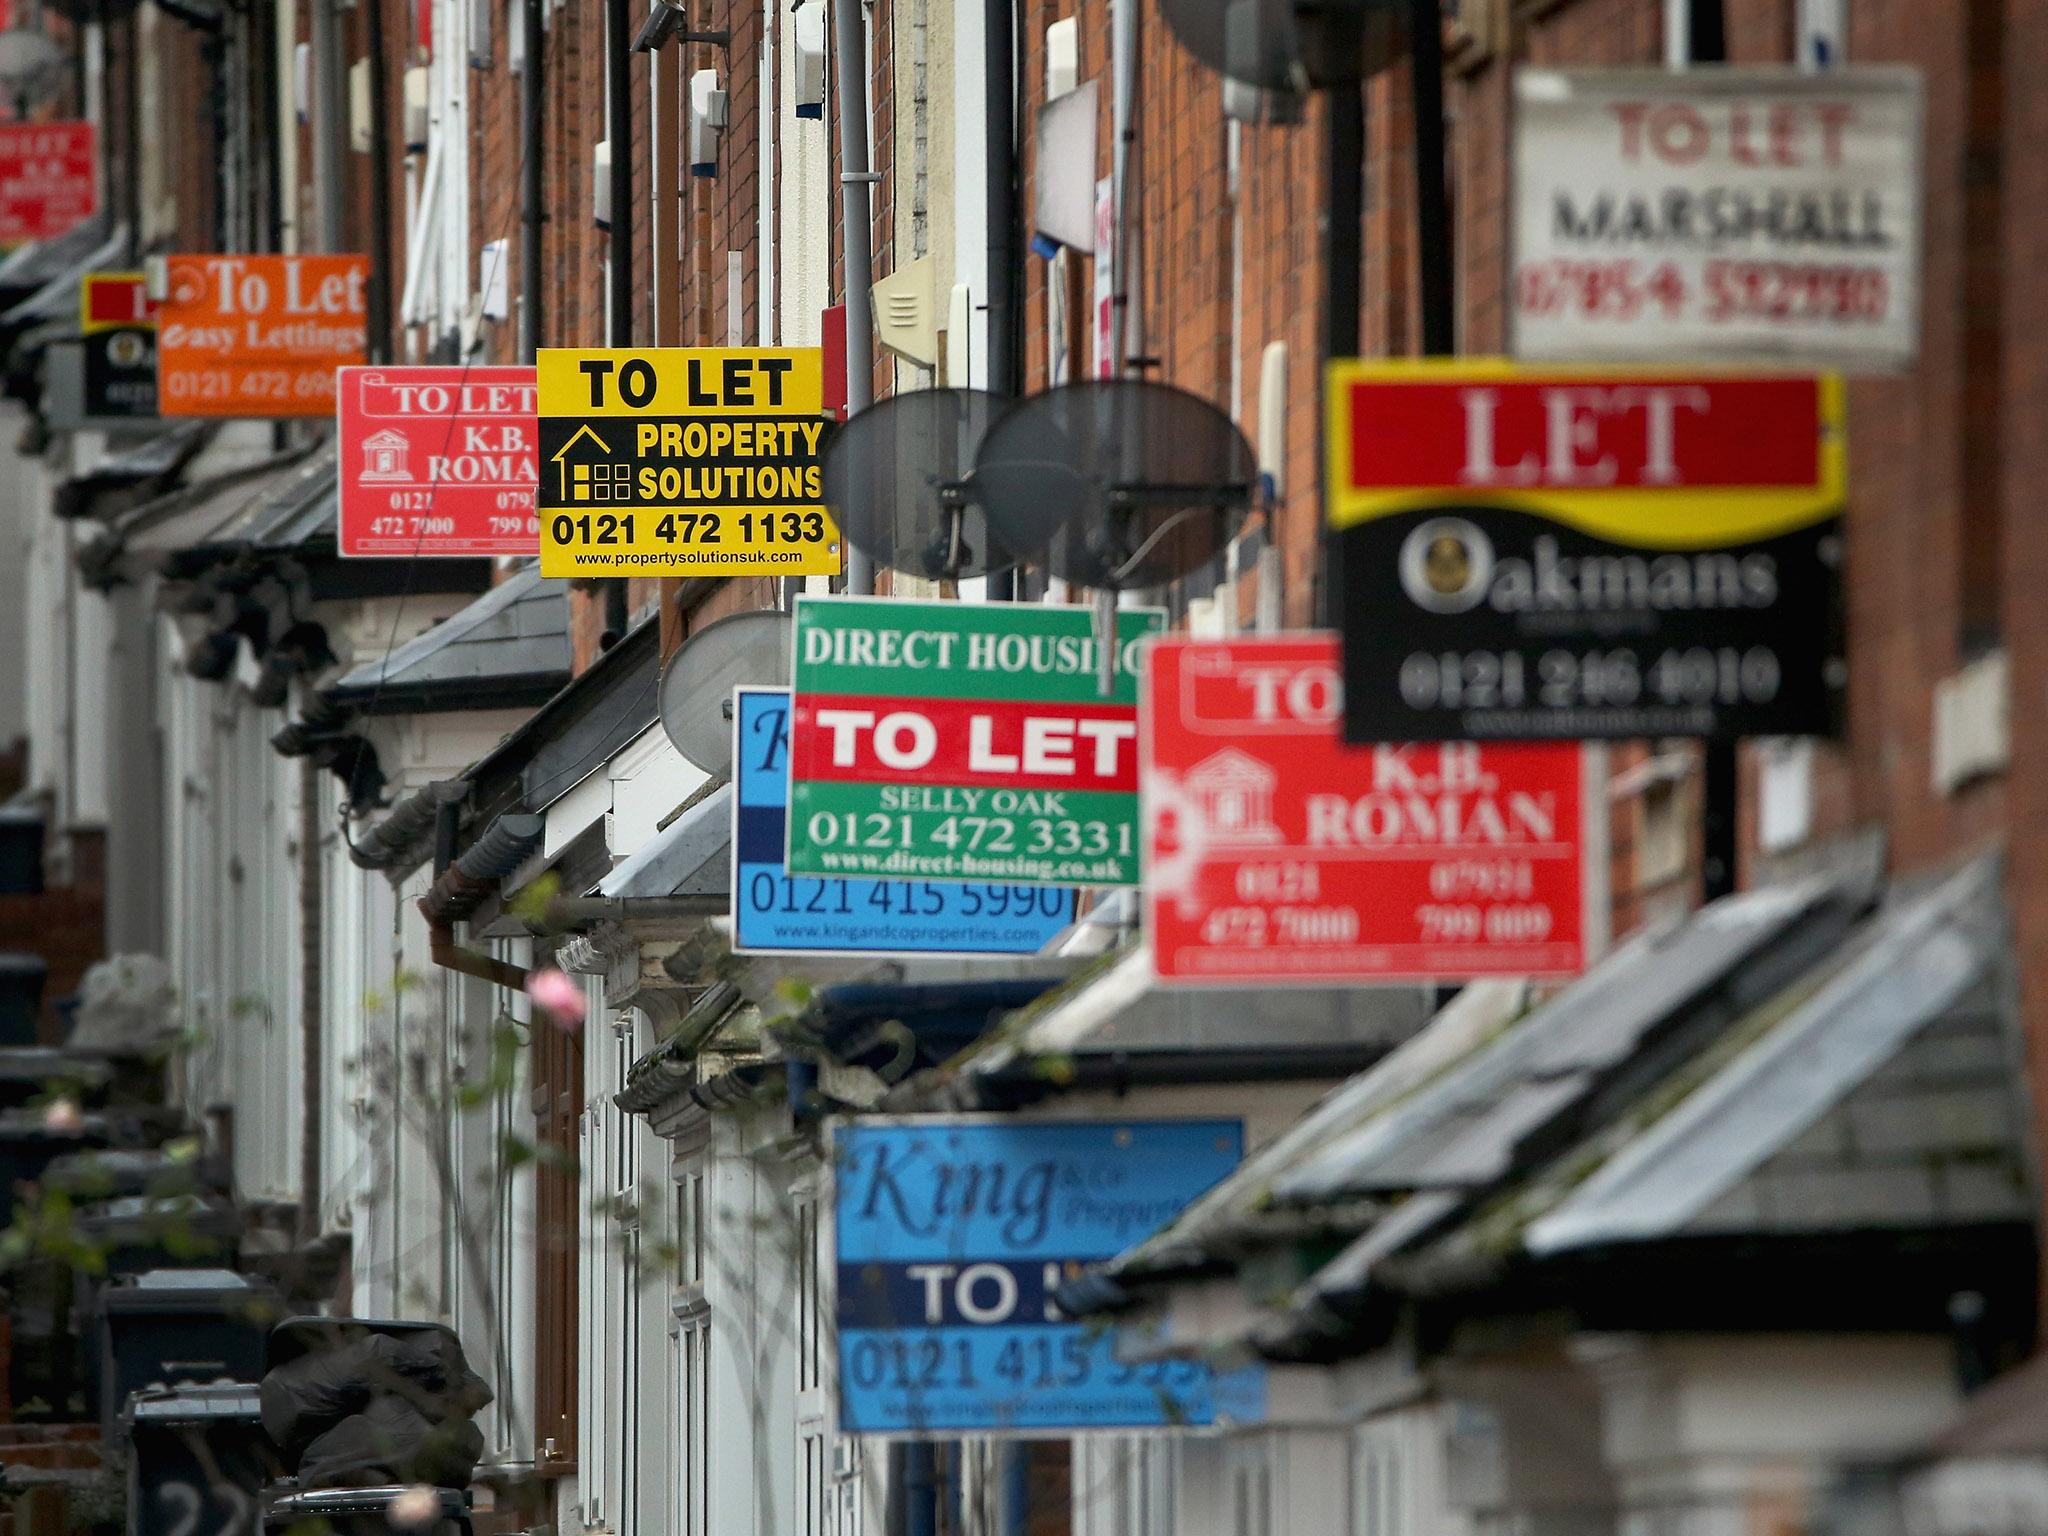 Lack of house building and spread of buy-to-let has made housing more insecure and costly